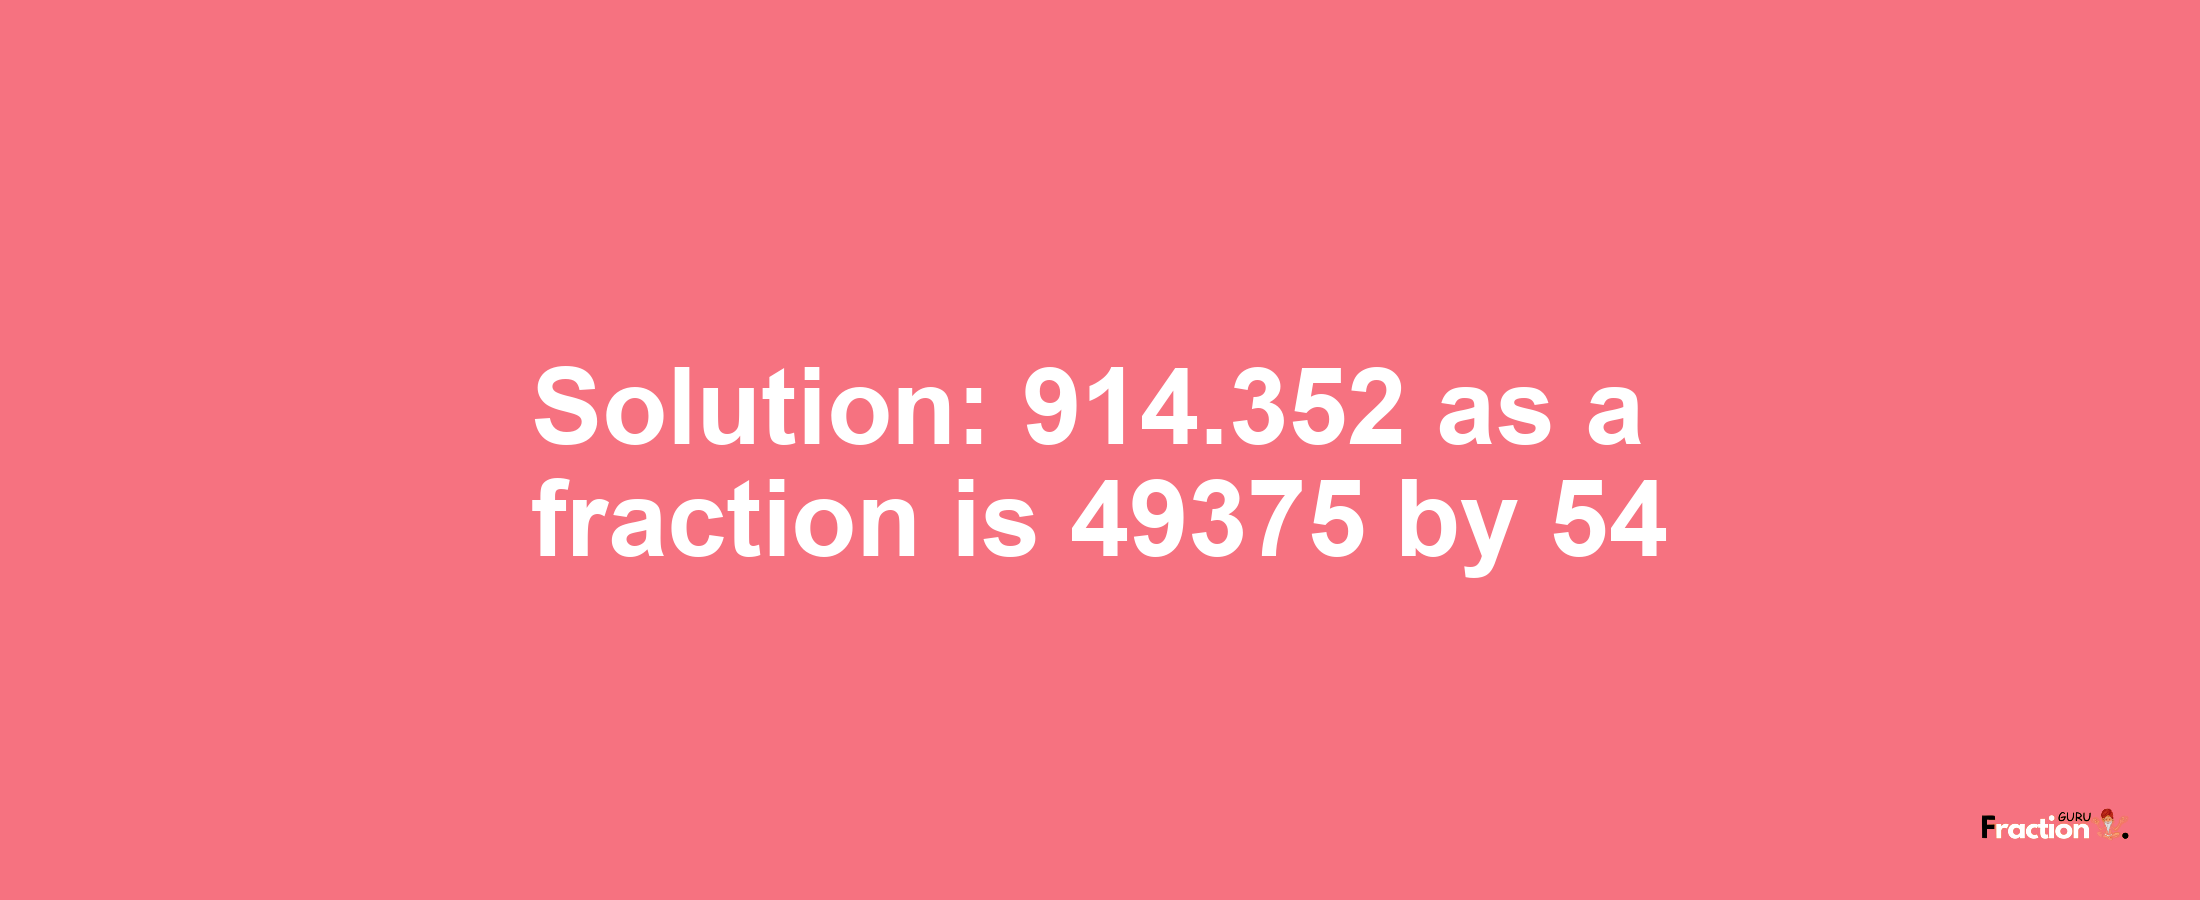 Solution:914.352 as a fraction is 49375/54